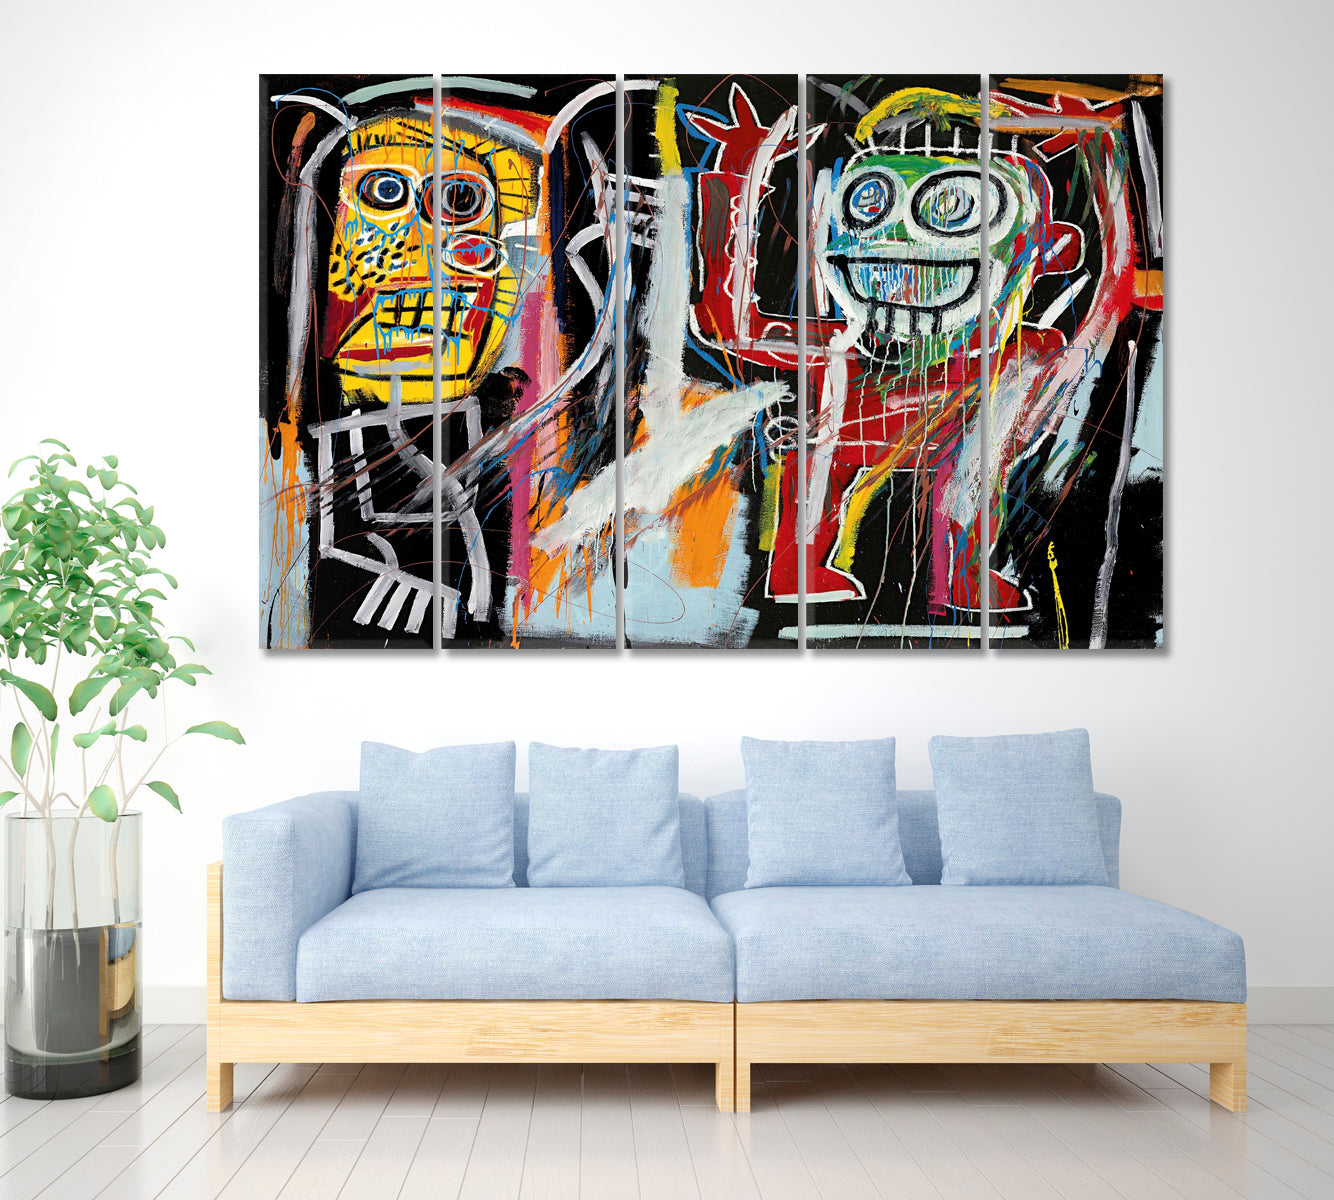 Basquiat Inspired Poster Abstract Art Print Artesty 5 panels 36" x 24" 